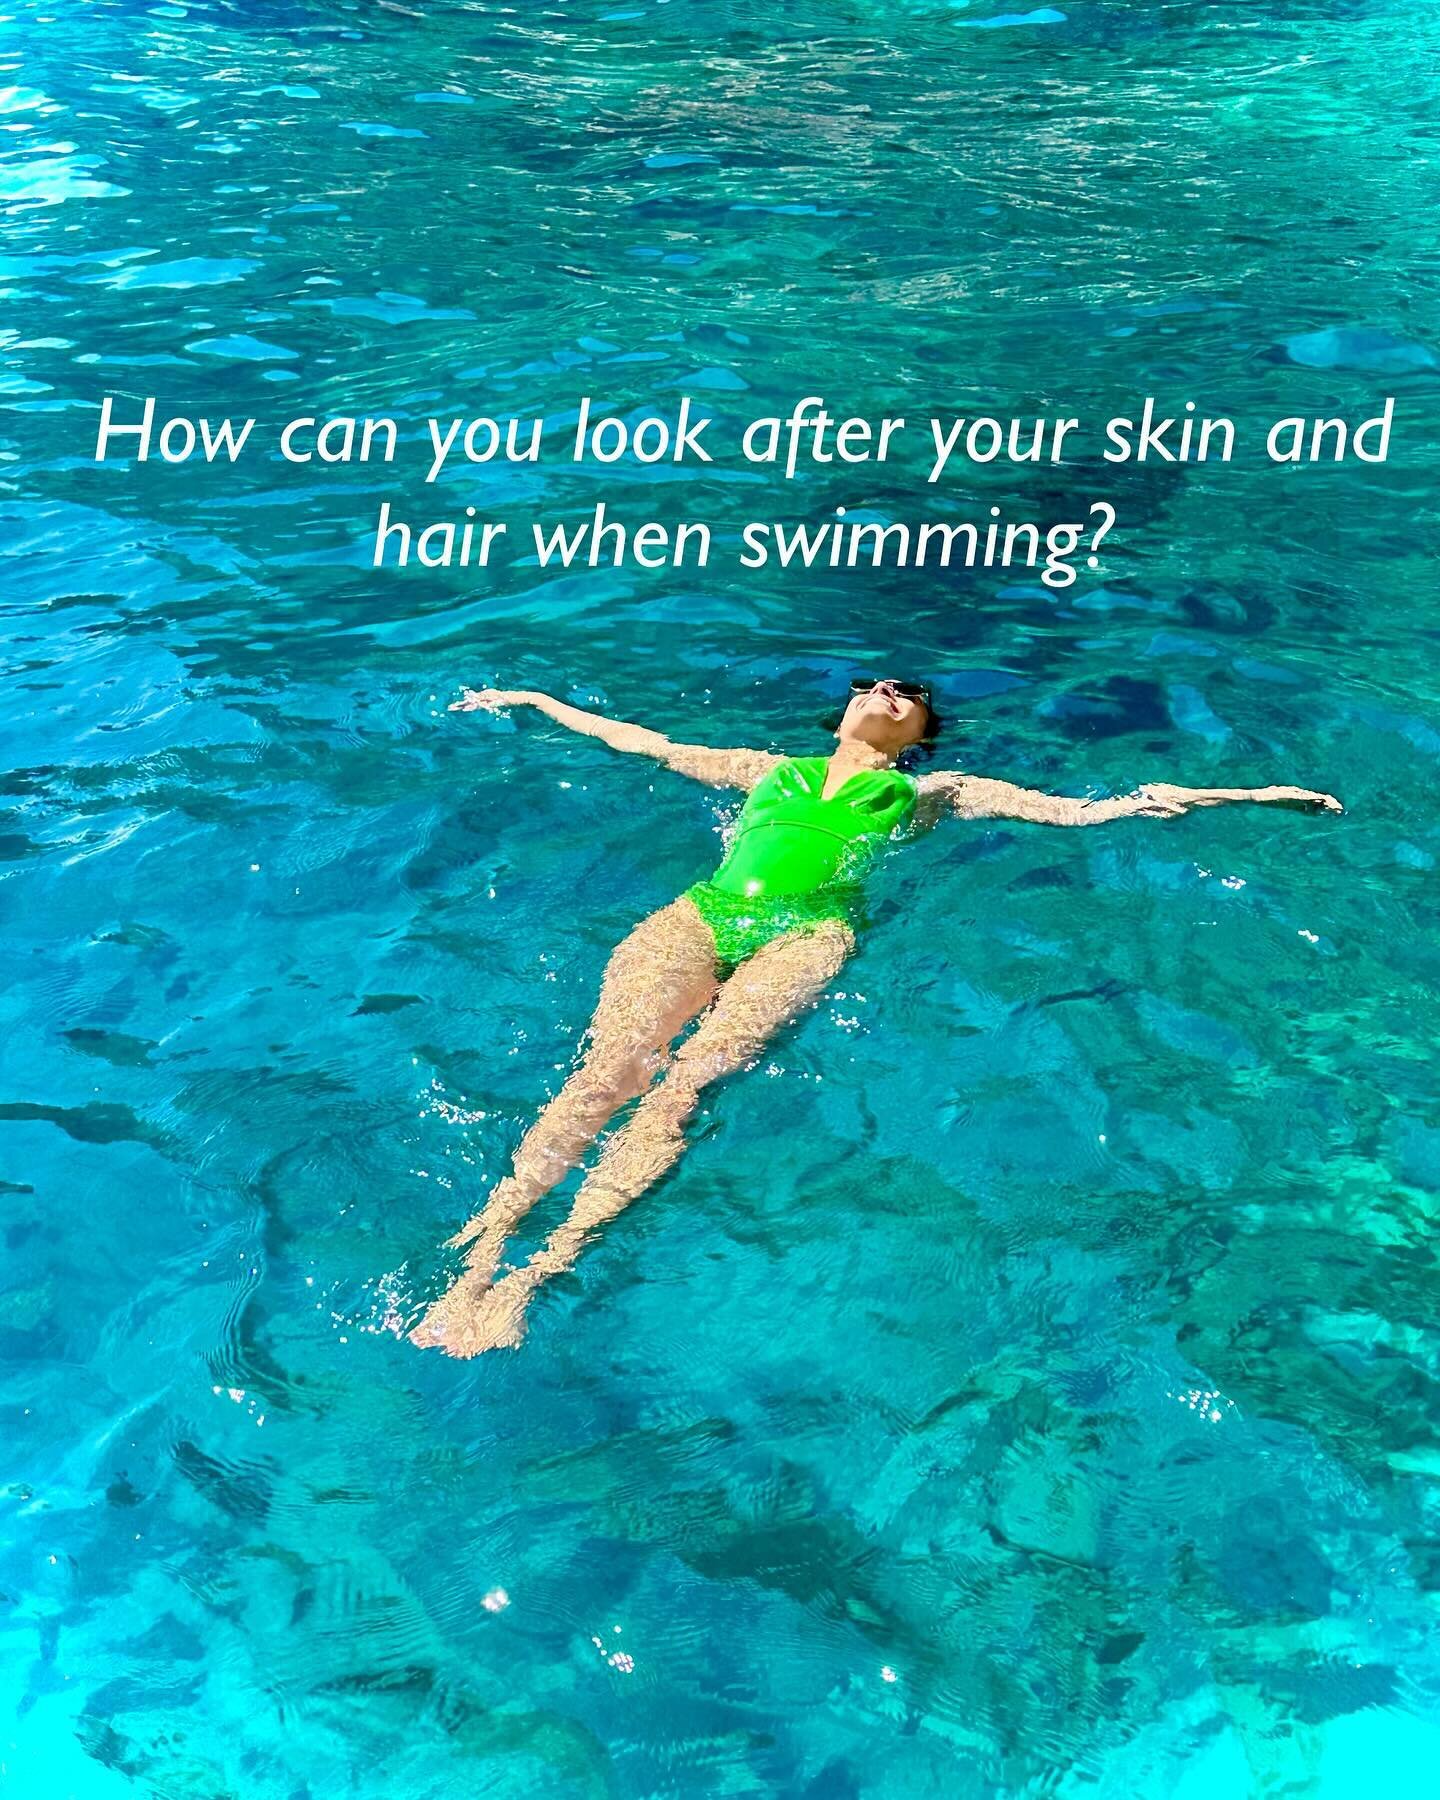 I LOVE swimming but my skin and hair often don&rsquo;t&hellip;! 

How can you protect your skin and hair if swimming is a regular part of your exercise routine like it is for me?
&nbsp;
1. Pre-swim Protection: Before getting into the pool, consider a